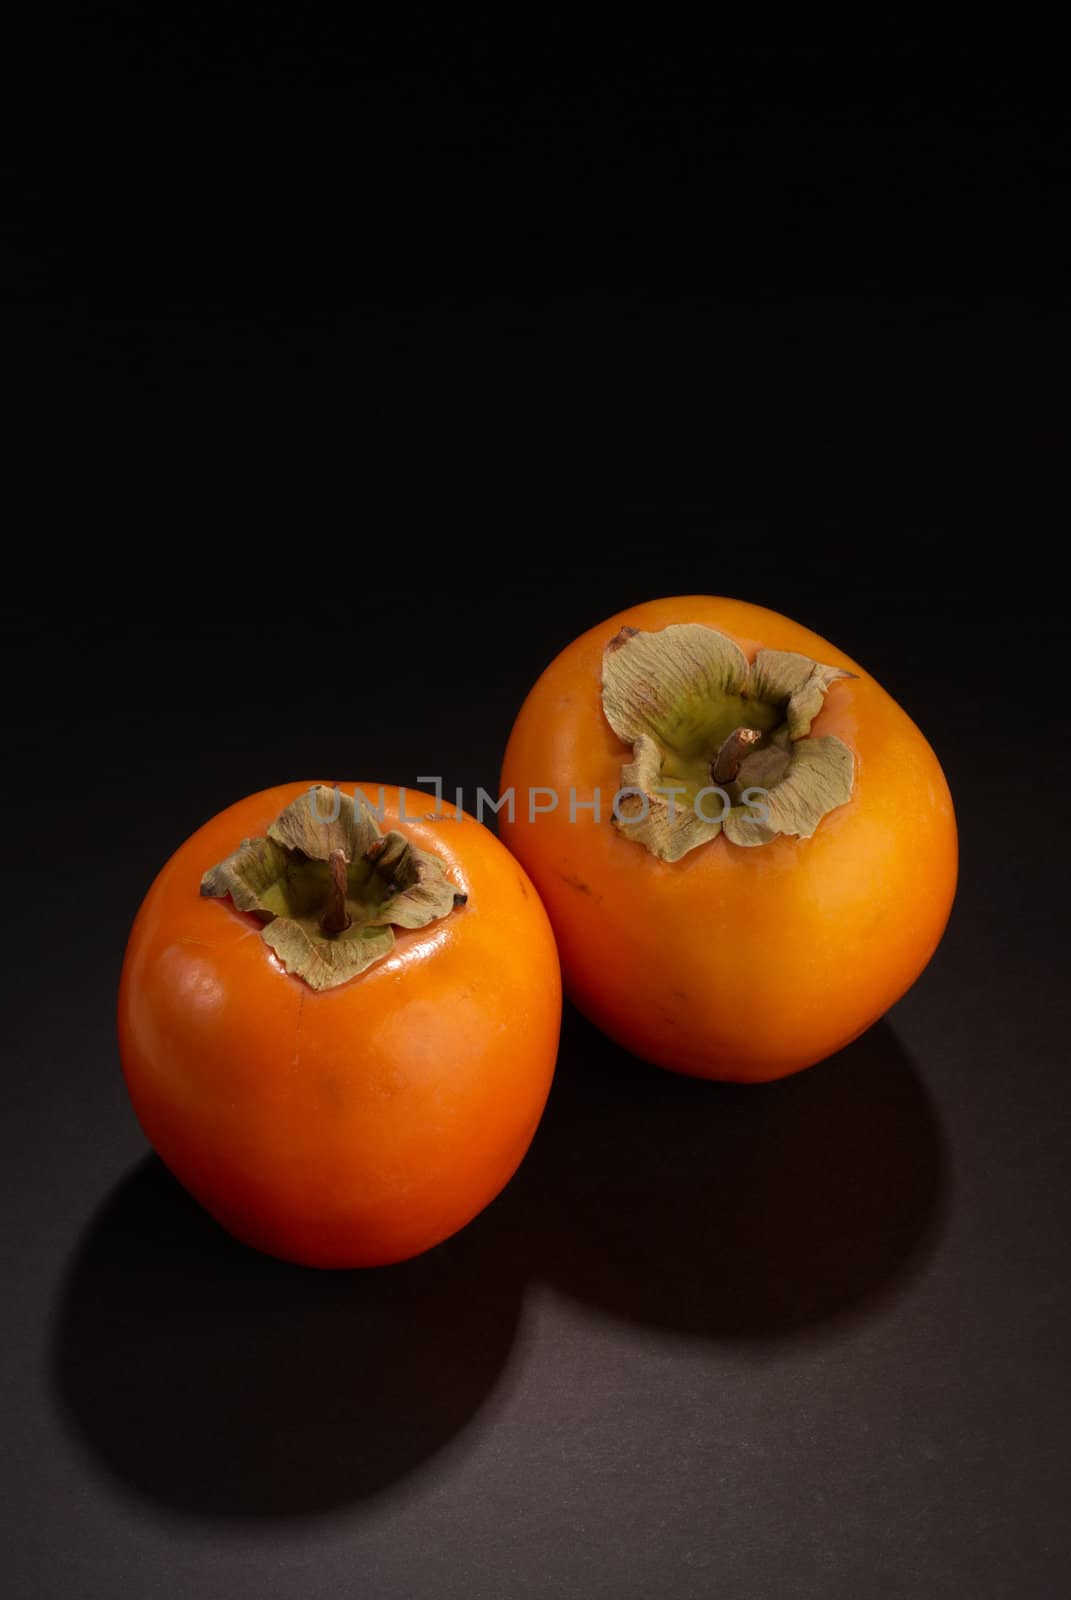 Two freshly picked persimmons, still life on black